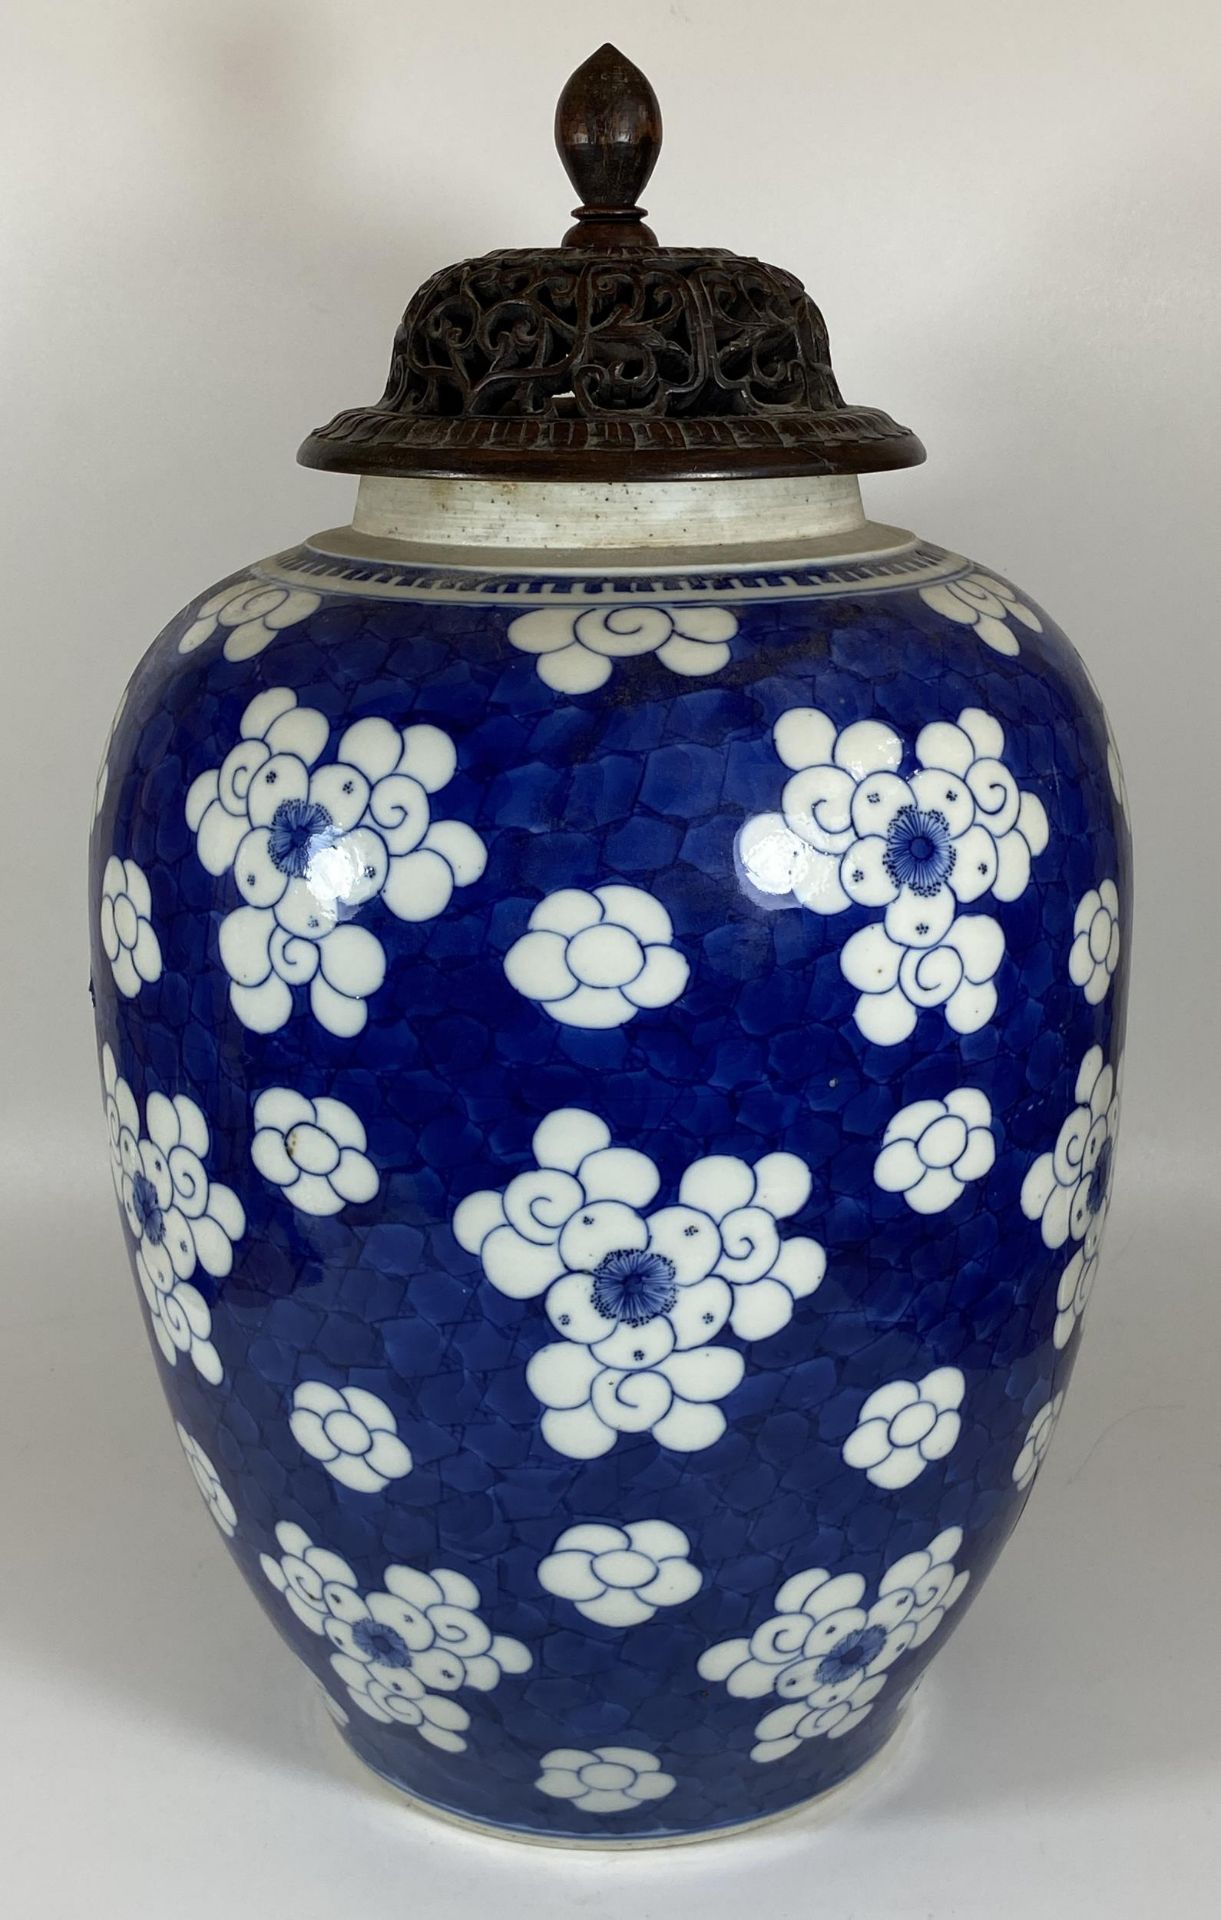 A LARGE 19TH CENTURY CHINESE BLUE AND WHITE PRUNUS BLOSSOM GINGER JAR WITH CARVED WOODEN LID, DOUBLE